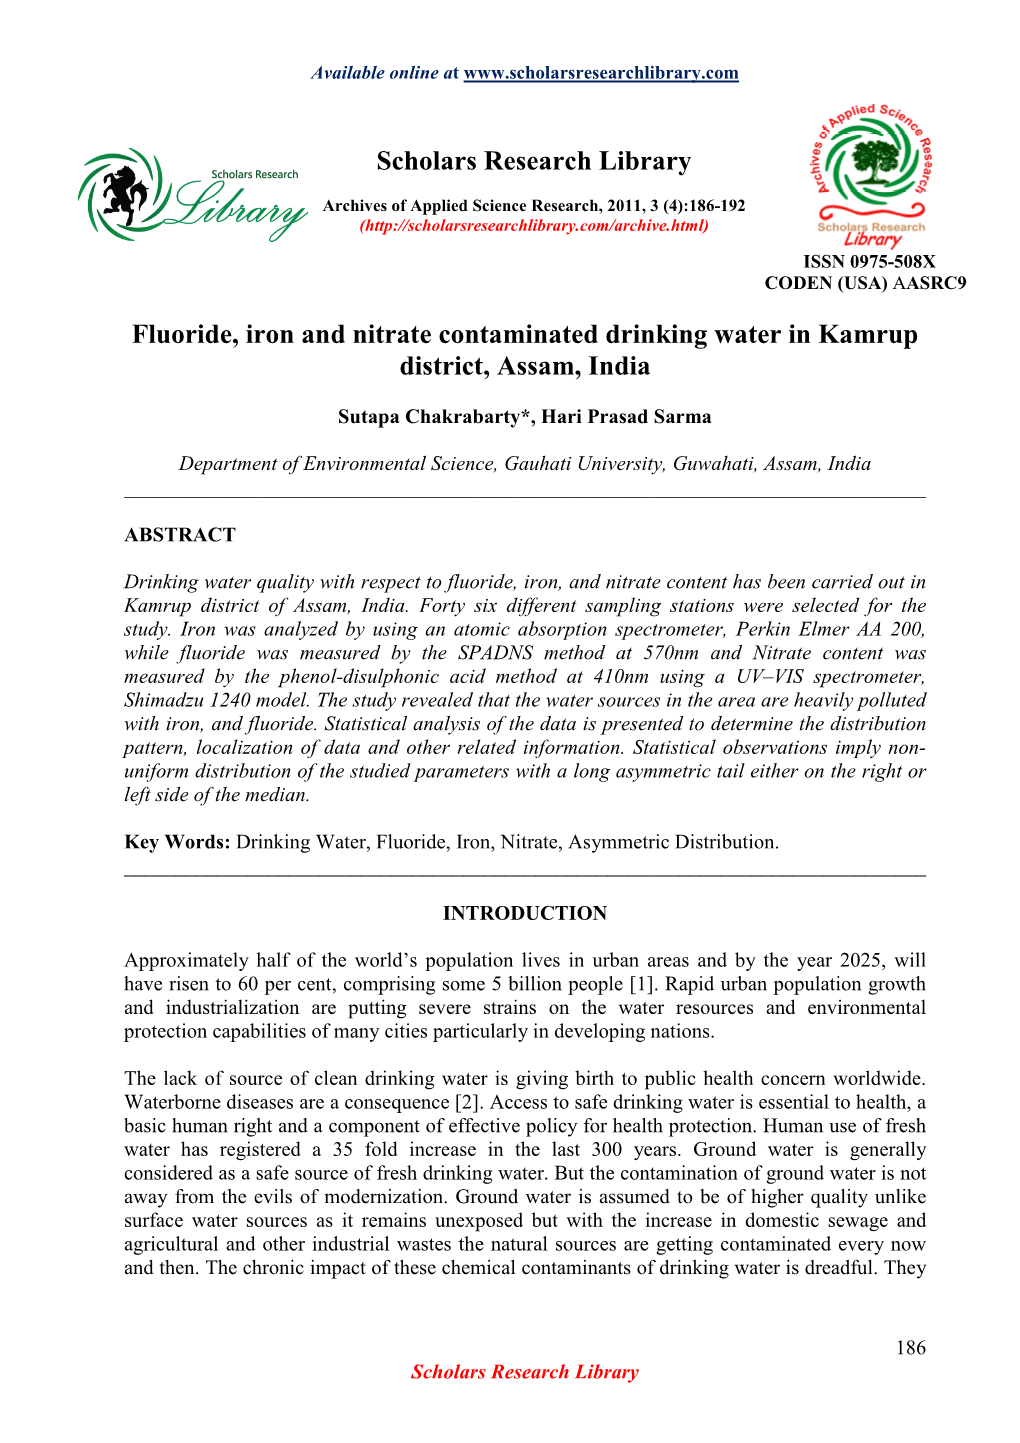 Fluoride, Iron and Nitrate Contaminated Drinking Water in Kamrup District, Assam, India